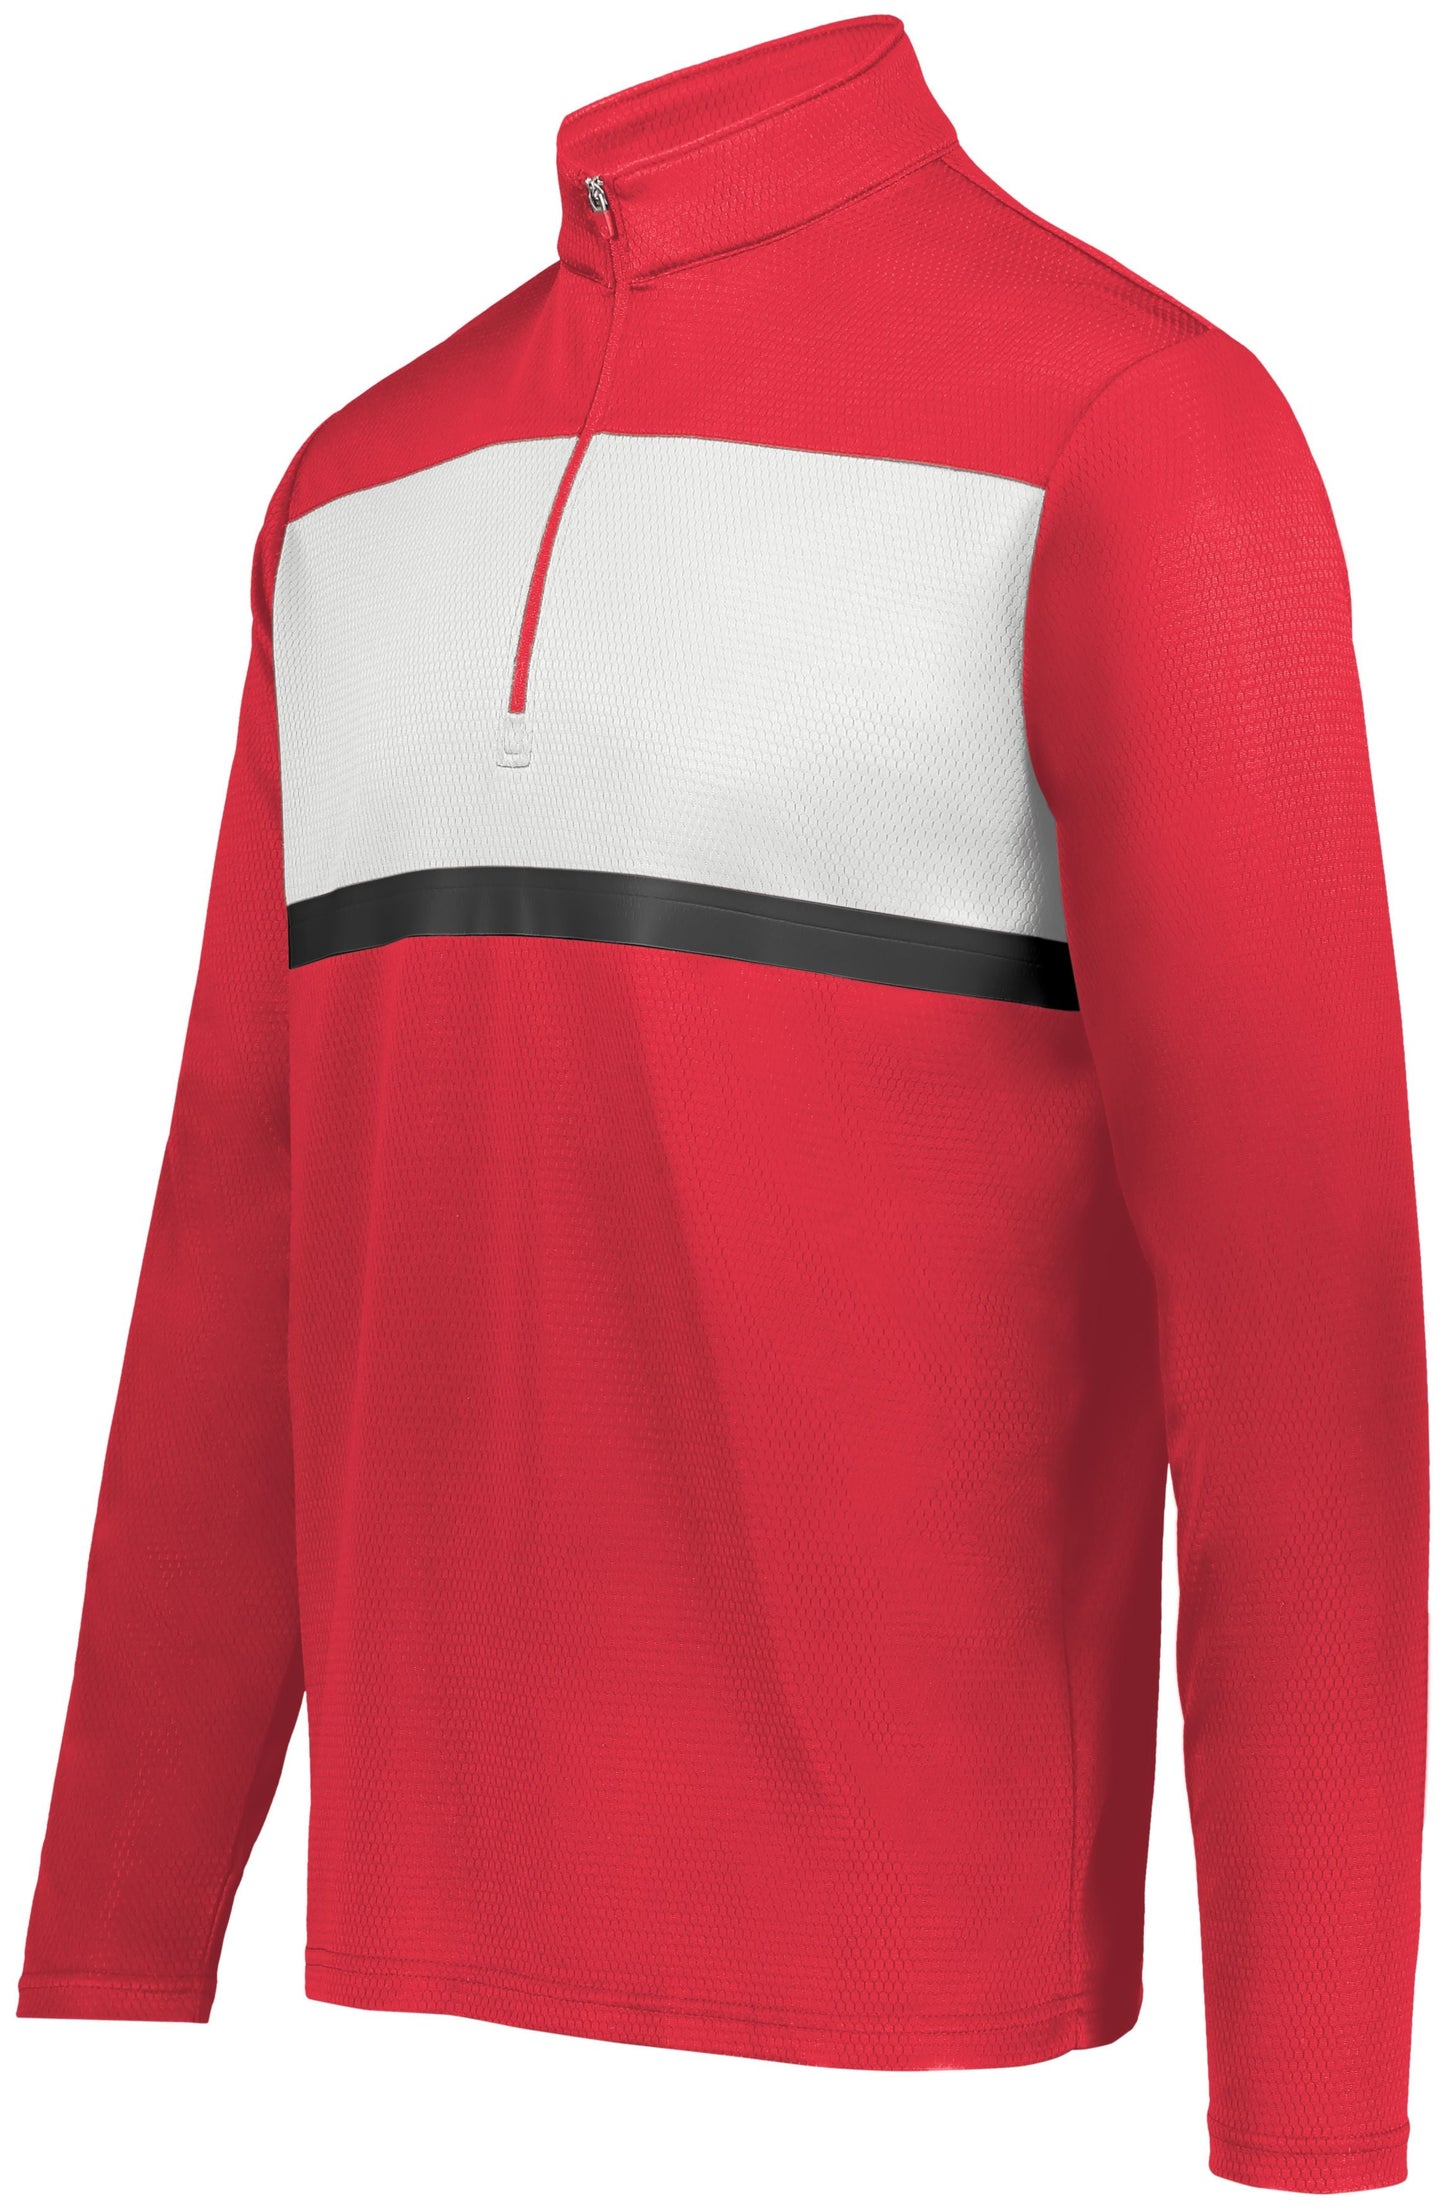 HOLLOWAY - PRISM BOLD 1/4 ZIP PULLOVER